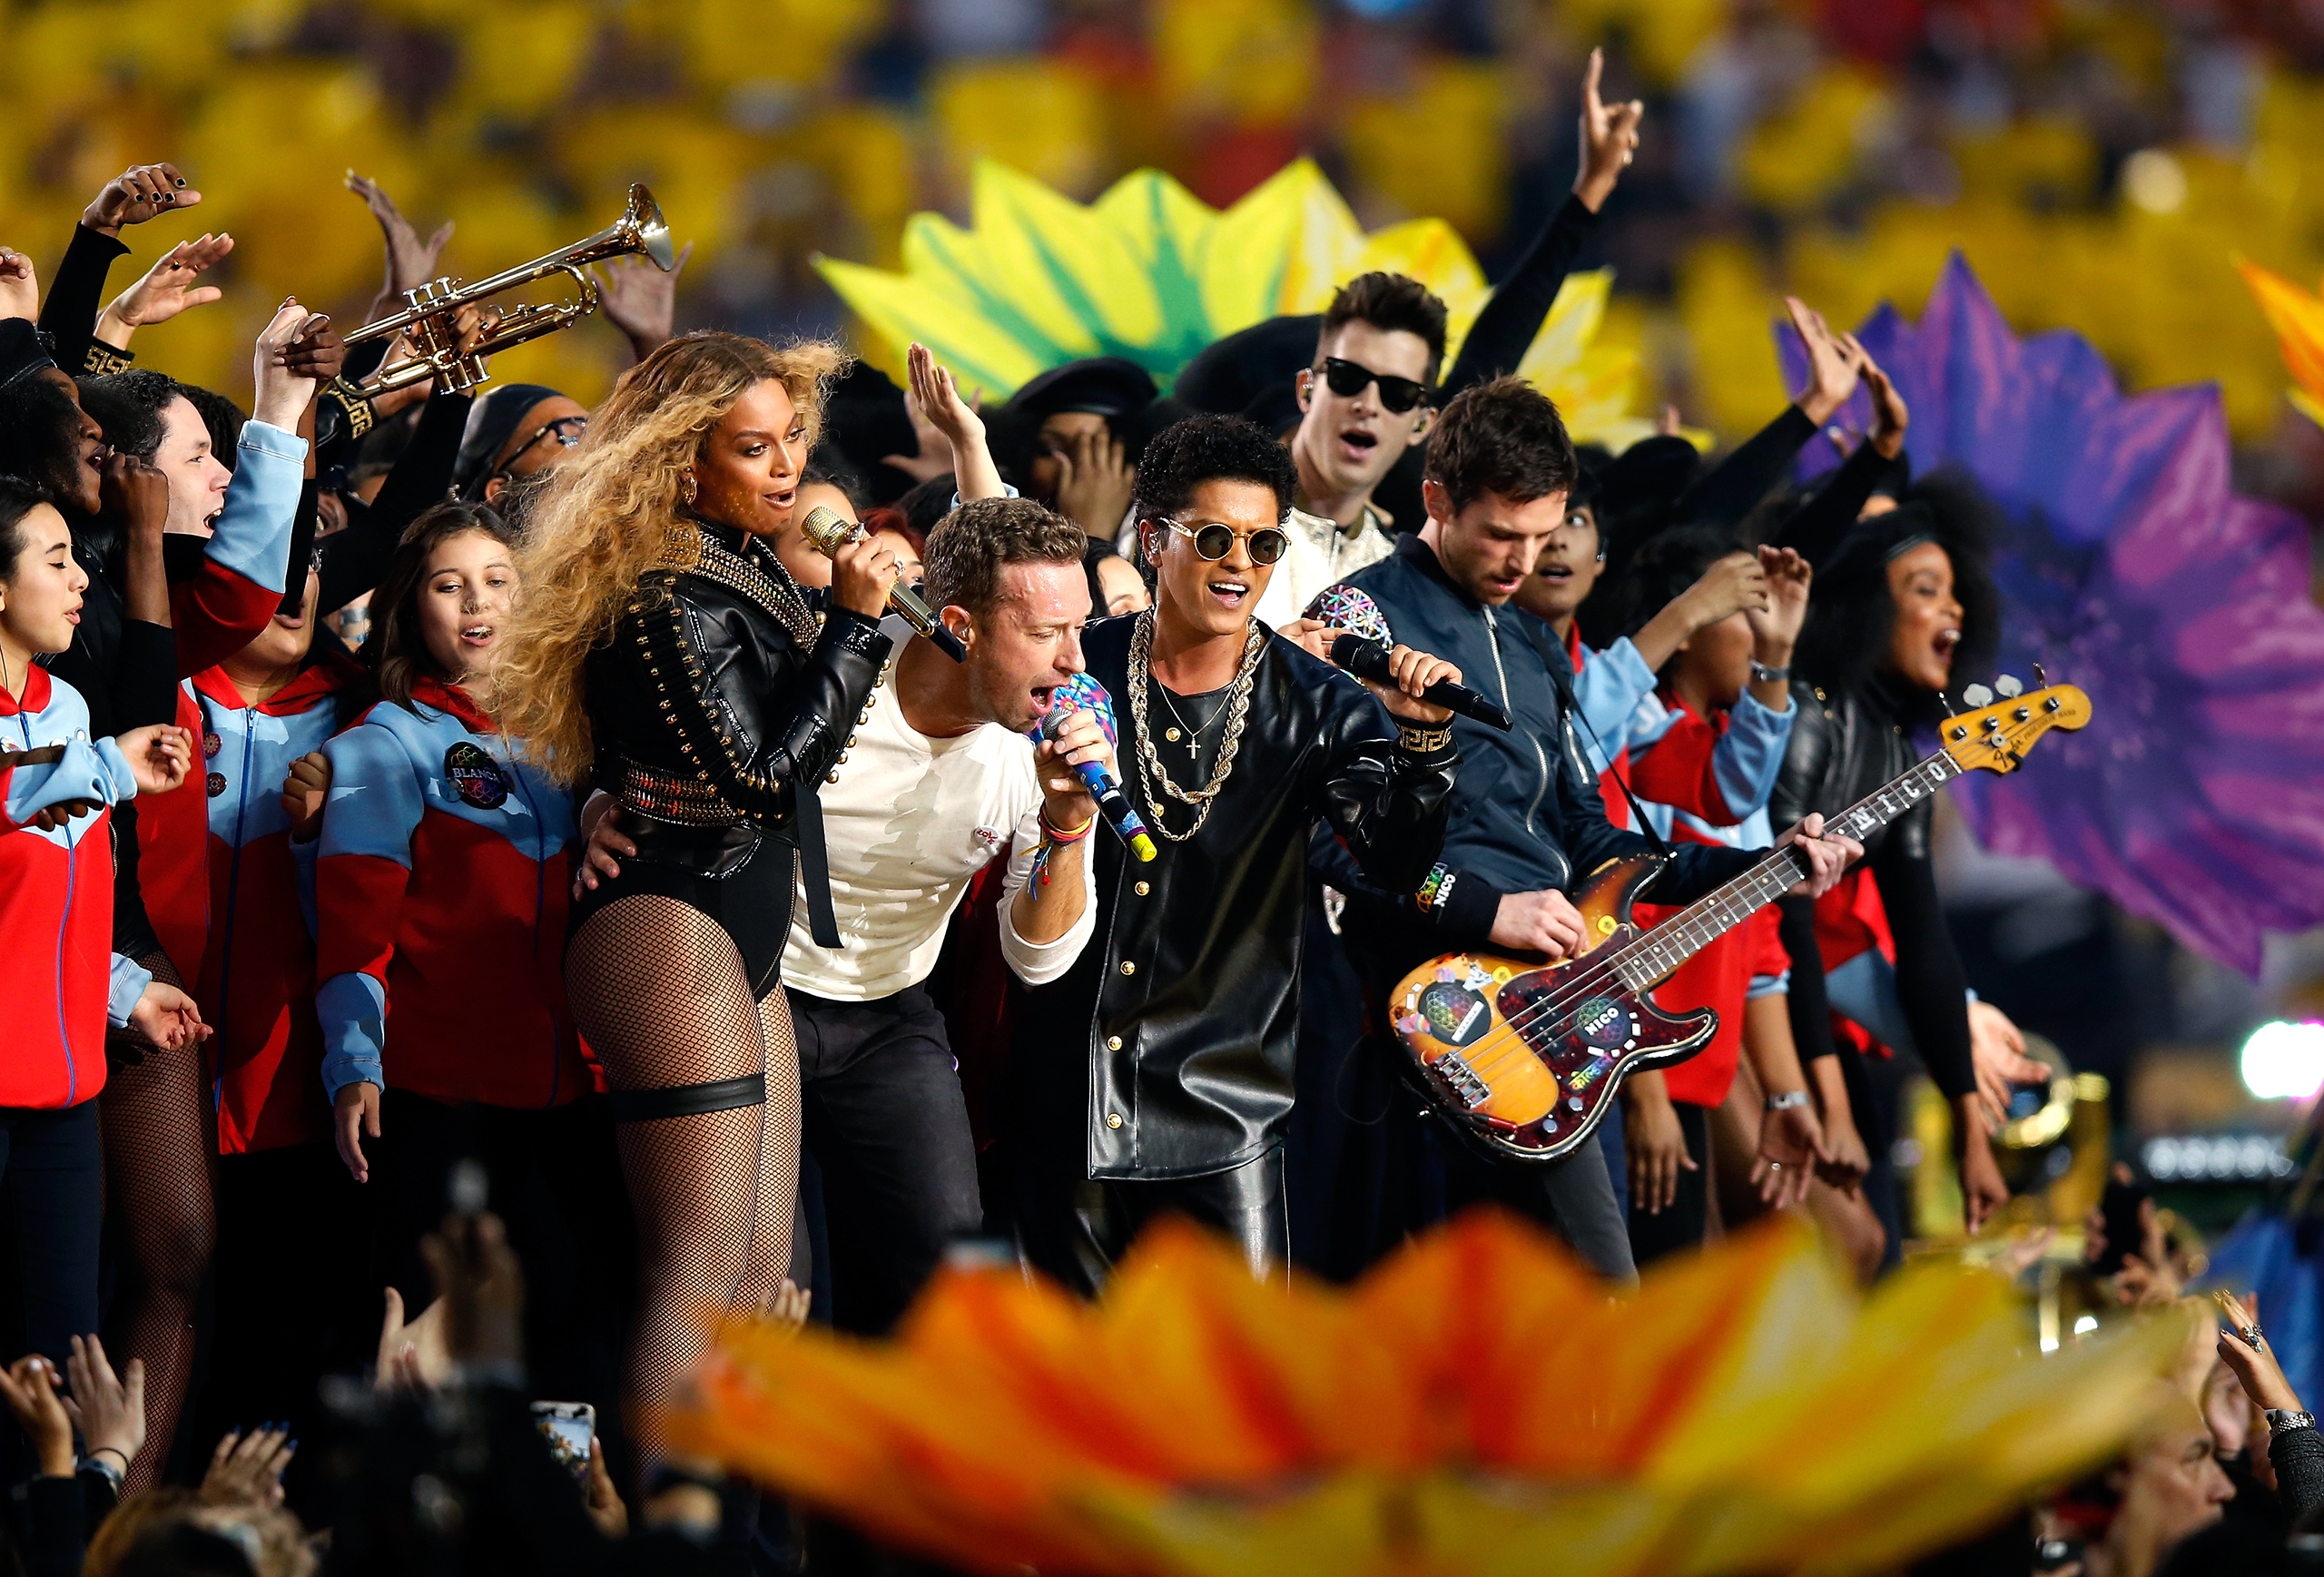 Beyoncé, Chris Martin of Coldplay, Bruno Mars, Mark Ronson and Guy Berryman of Coldplay perform during the Pepsi Super Bowl 50 Halftime Show at Levi's Stadium in Santa Clara, Calif., on Feb. 7, 2016.